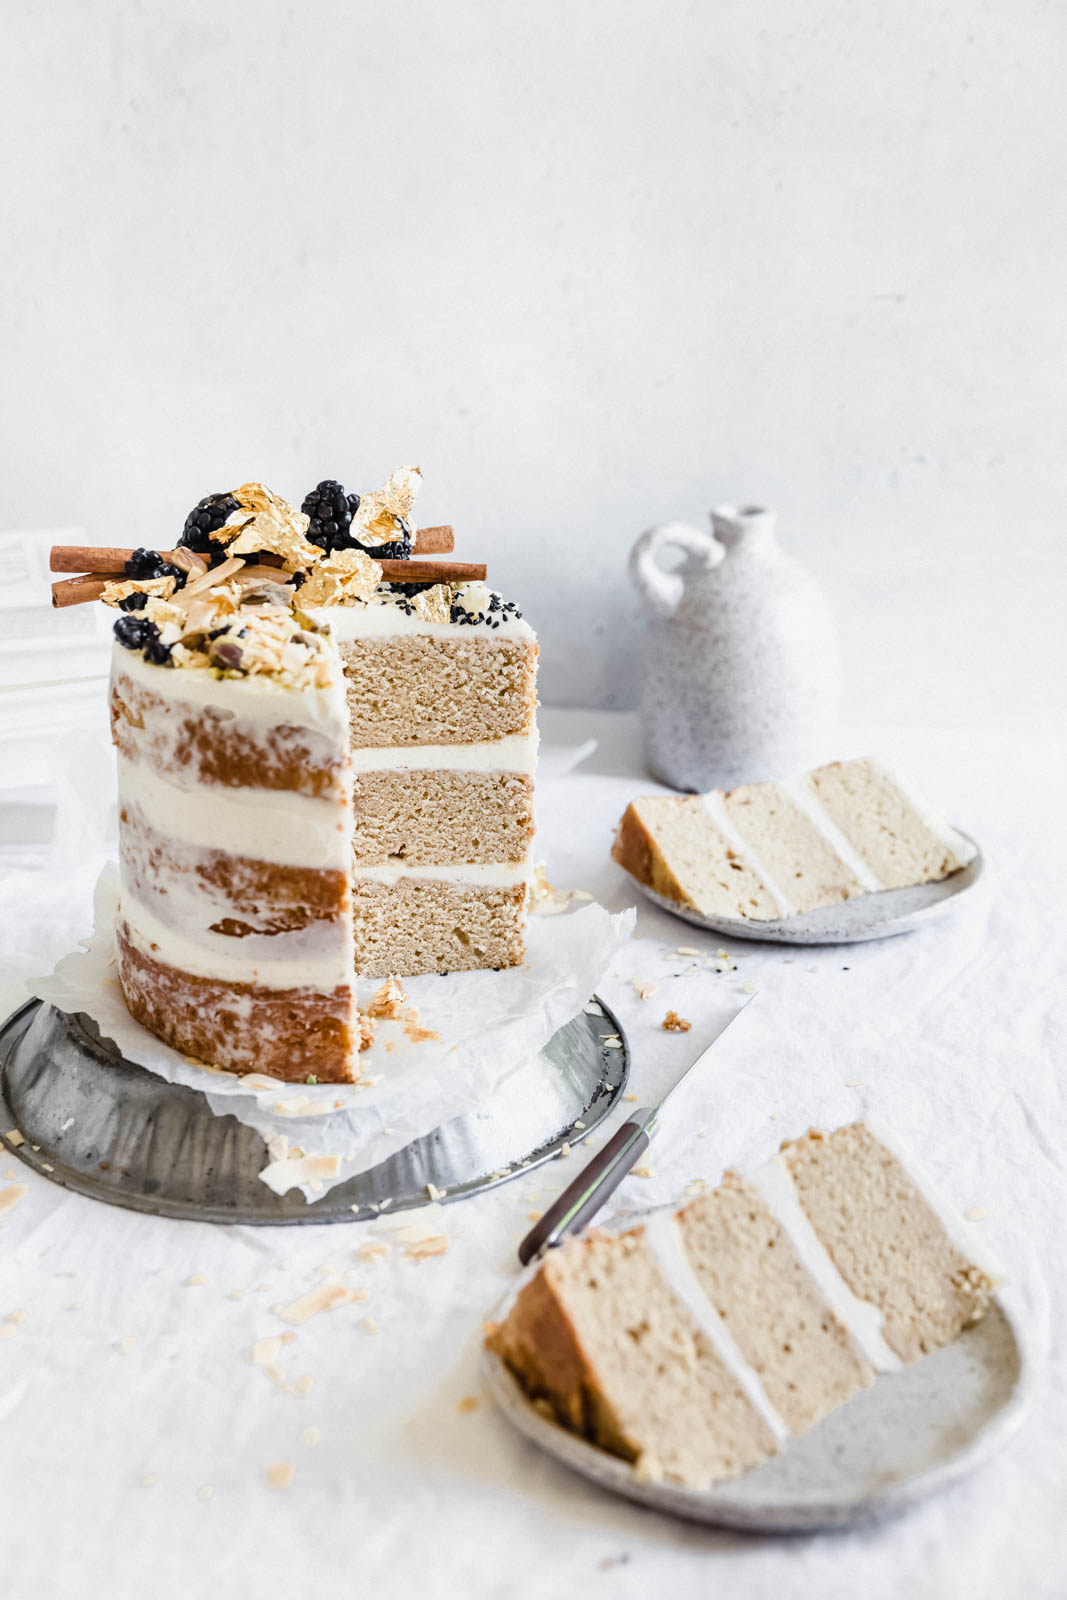 Like chai tea in a cake, this chai spice cake with vanilla cream cheese frosting is delicately spiced with cinnamon, cardamom and ginger.  Yummy.